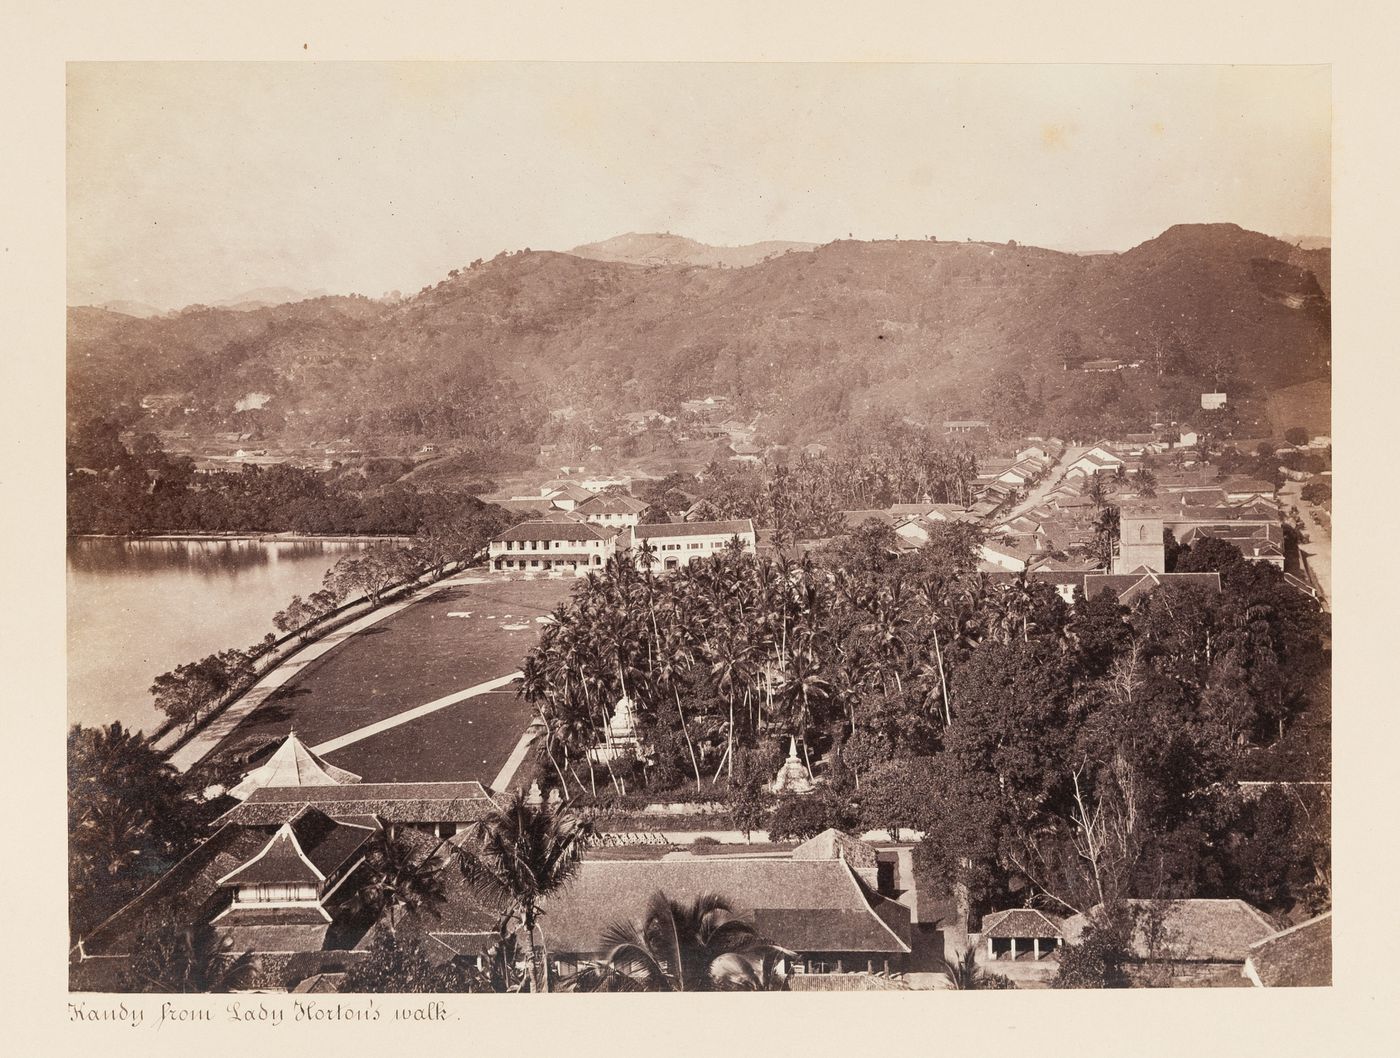 View of Kandy from Lady Horton's Walk with Kandy Lake on the left, St. Paul's Church on the right and the Temple of the Tooth (also known as the Sri Dalada Maligawa) in the foreground, Ceylon (now Sri Lanka)